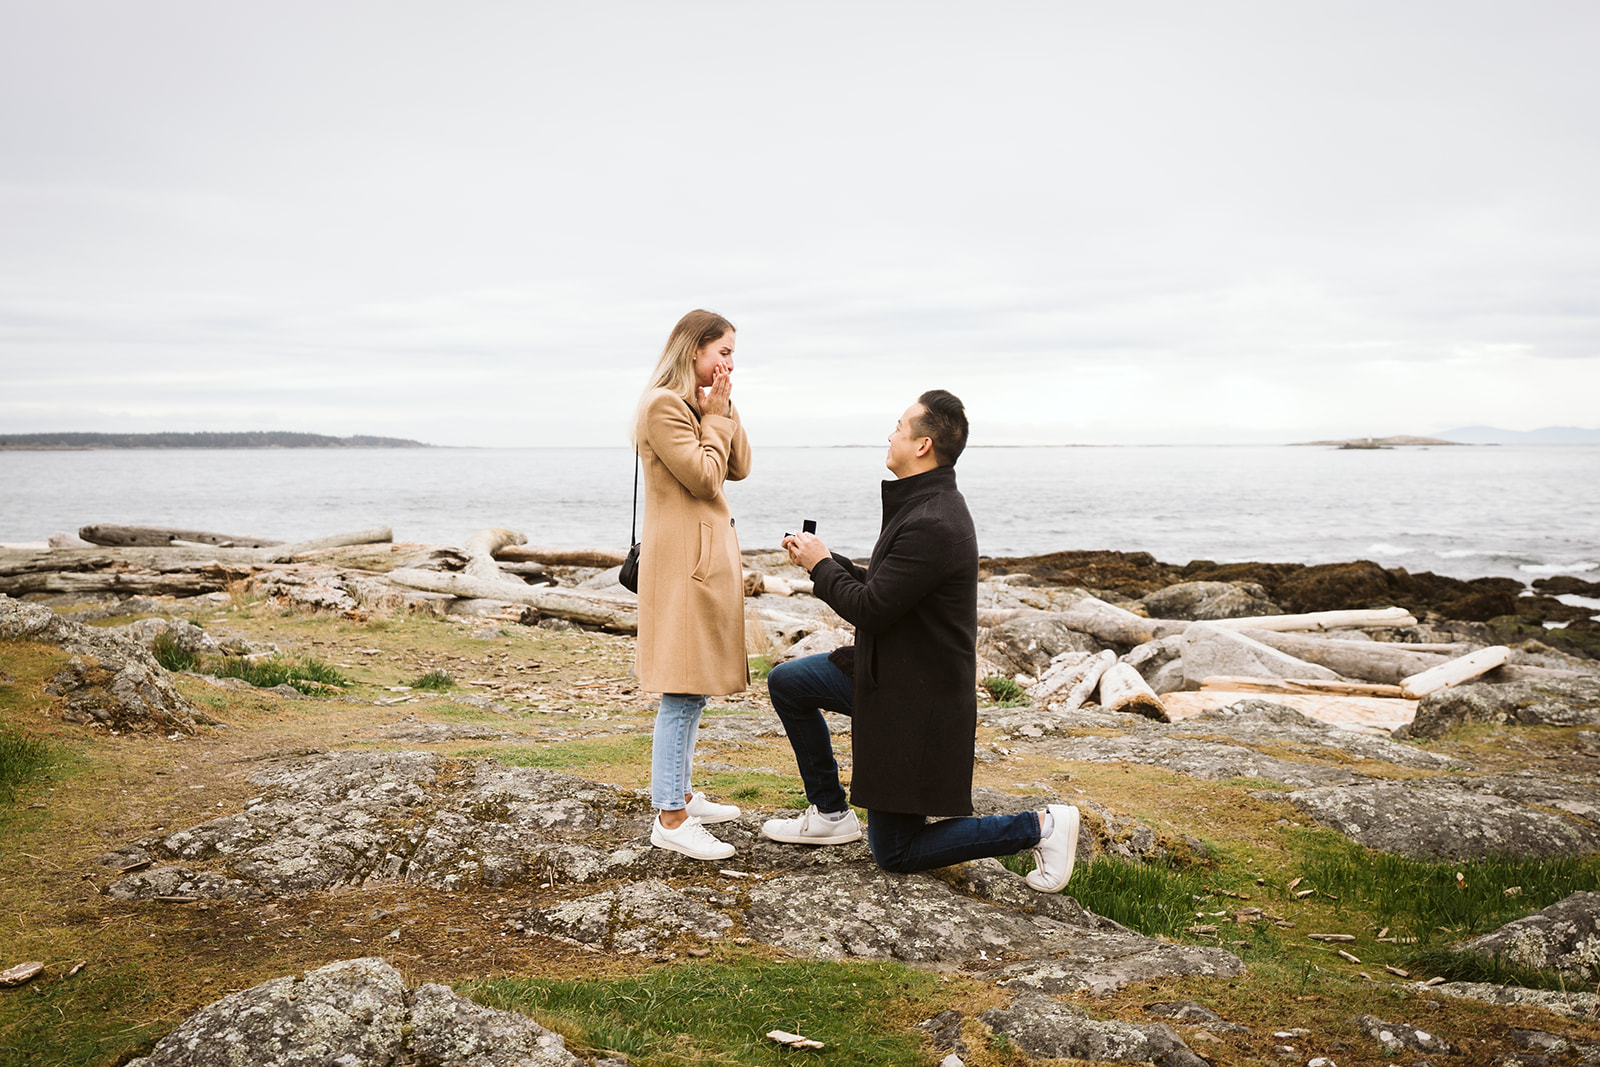 Man kneeling on rocks as he proposes to his girlfriend. She has her hands up, covering her face.